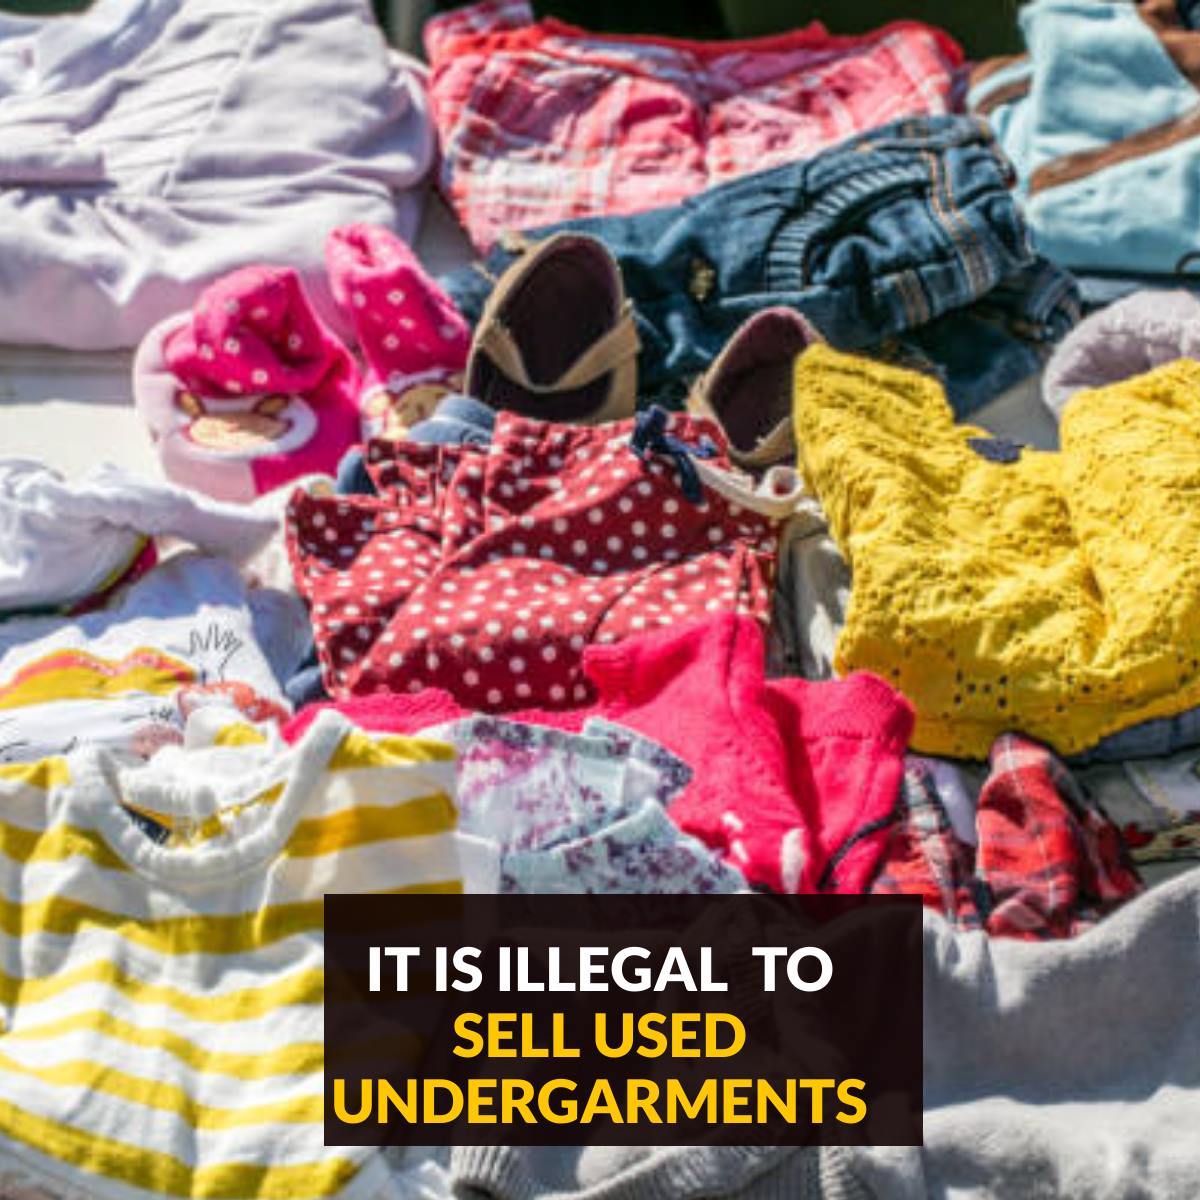 Call To Ban Second-Hand Underwear In Zambia, General News